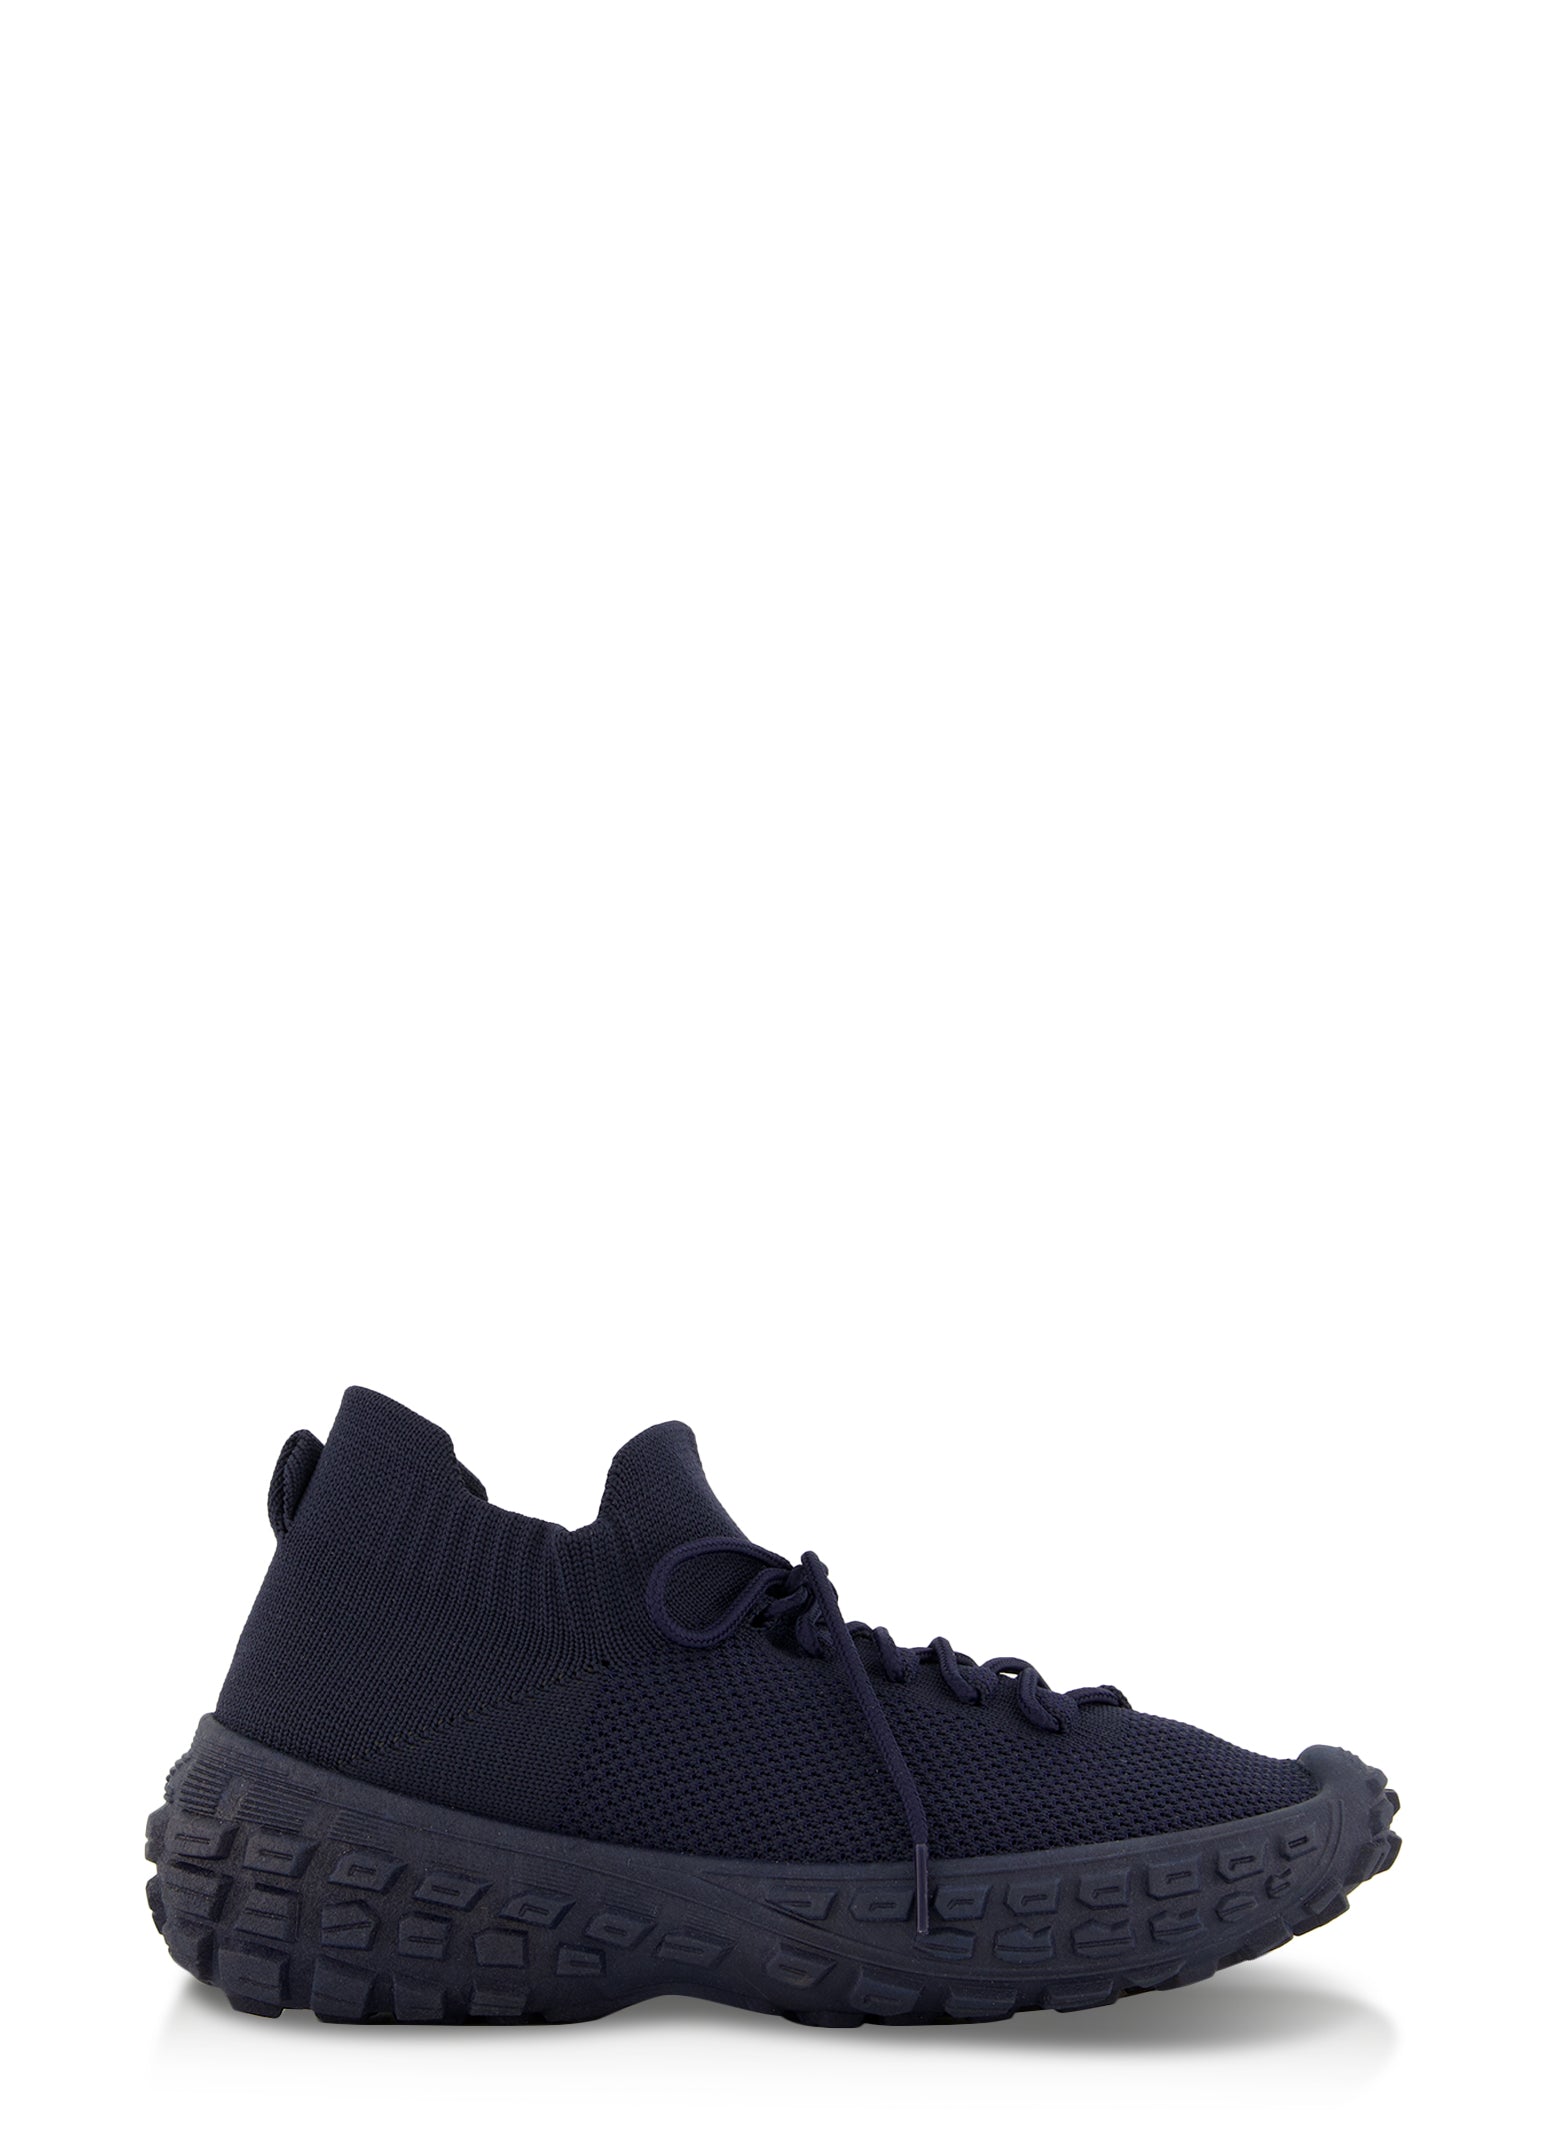 Solid Textured Knit Lace Up Athletic Sneakers